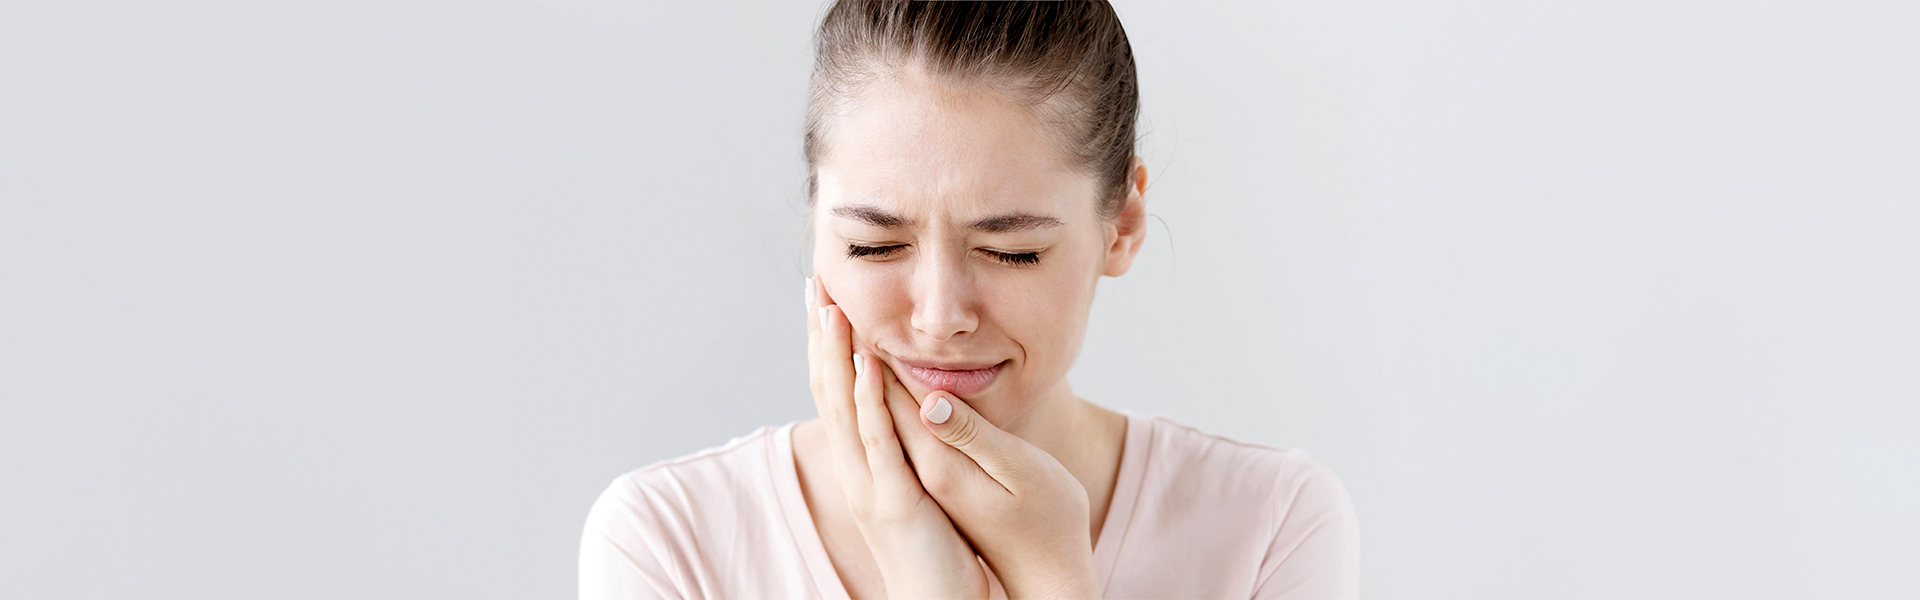 What Can You Do If Recommended a Tooth Extraction by Your Dentist?